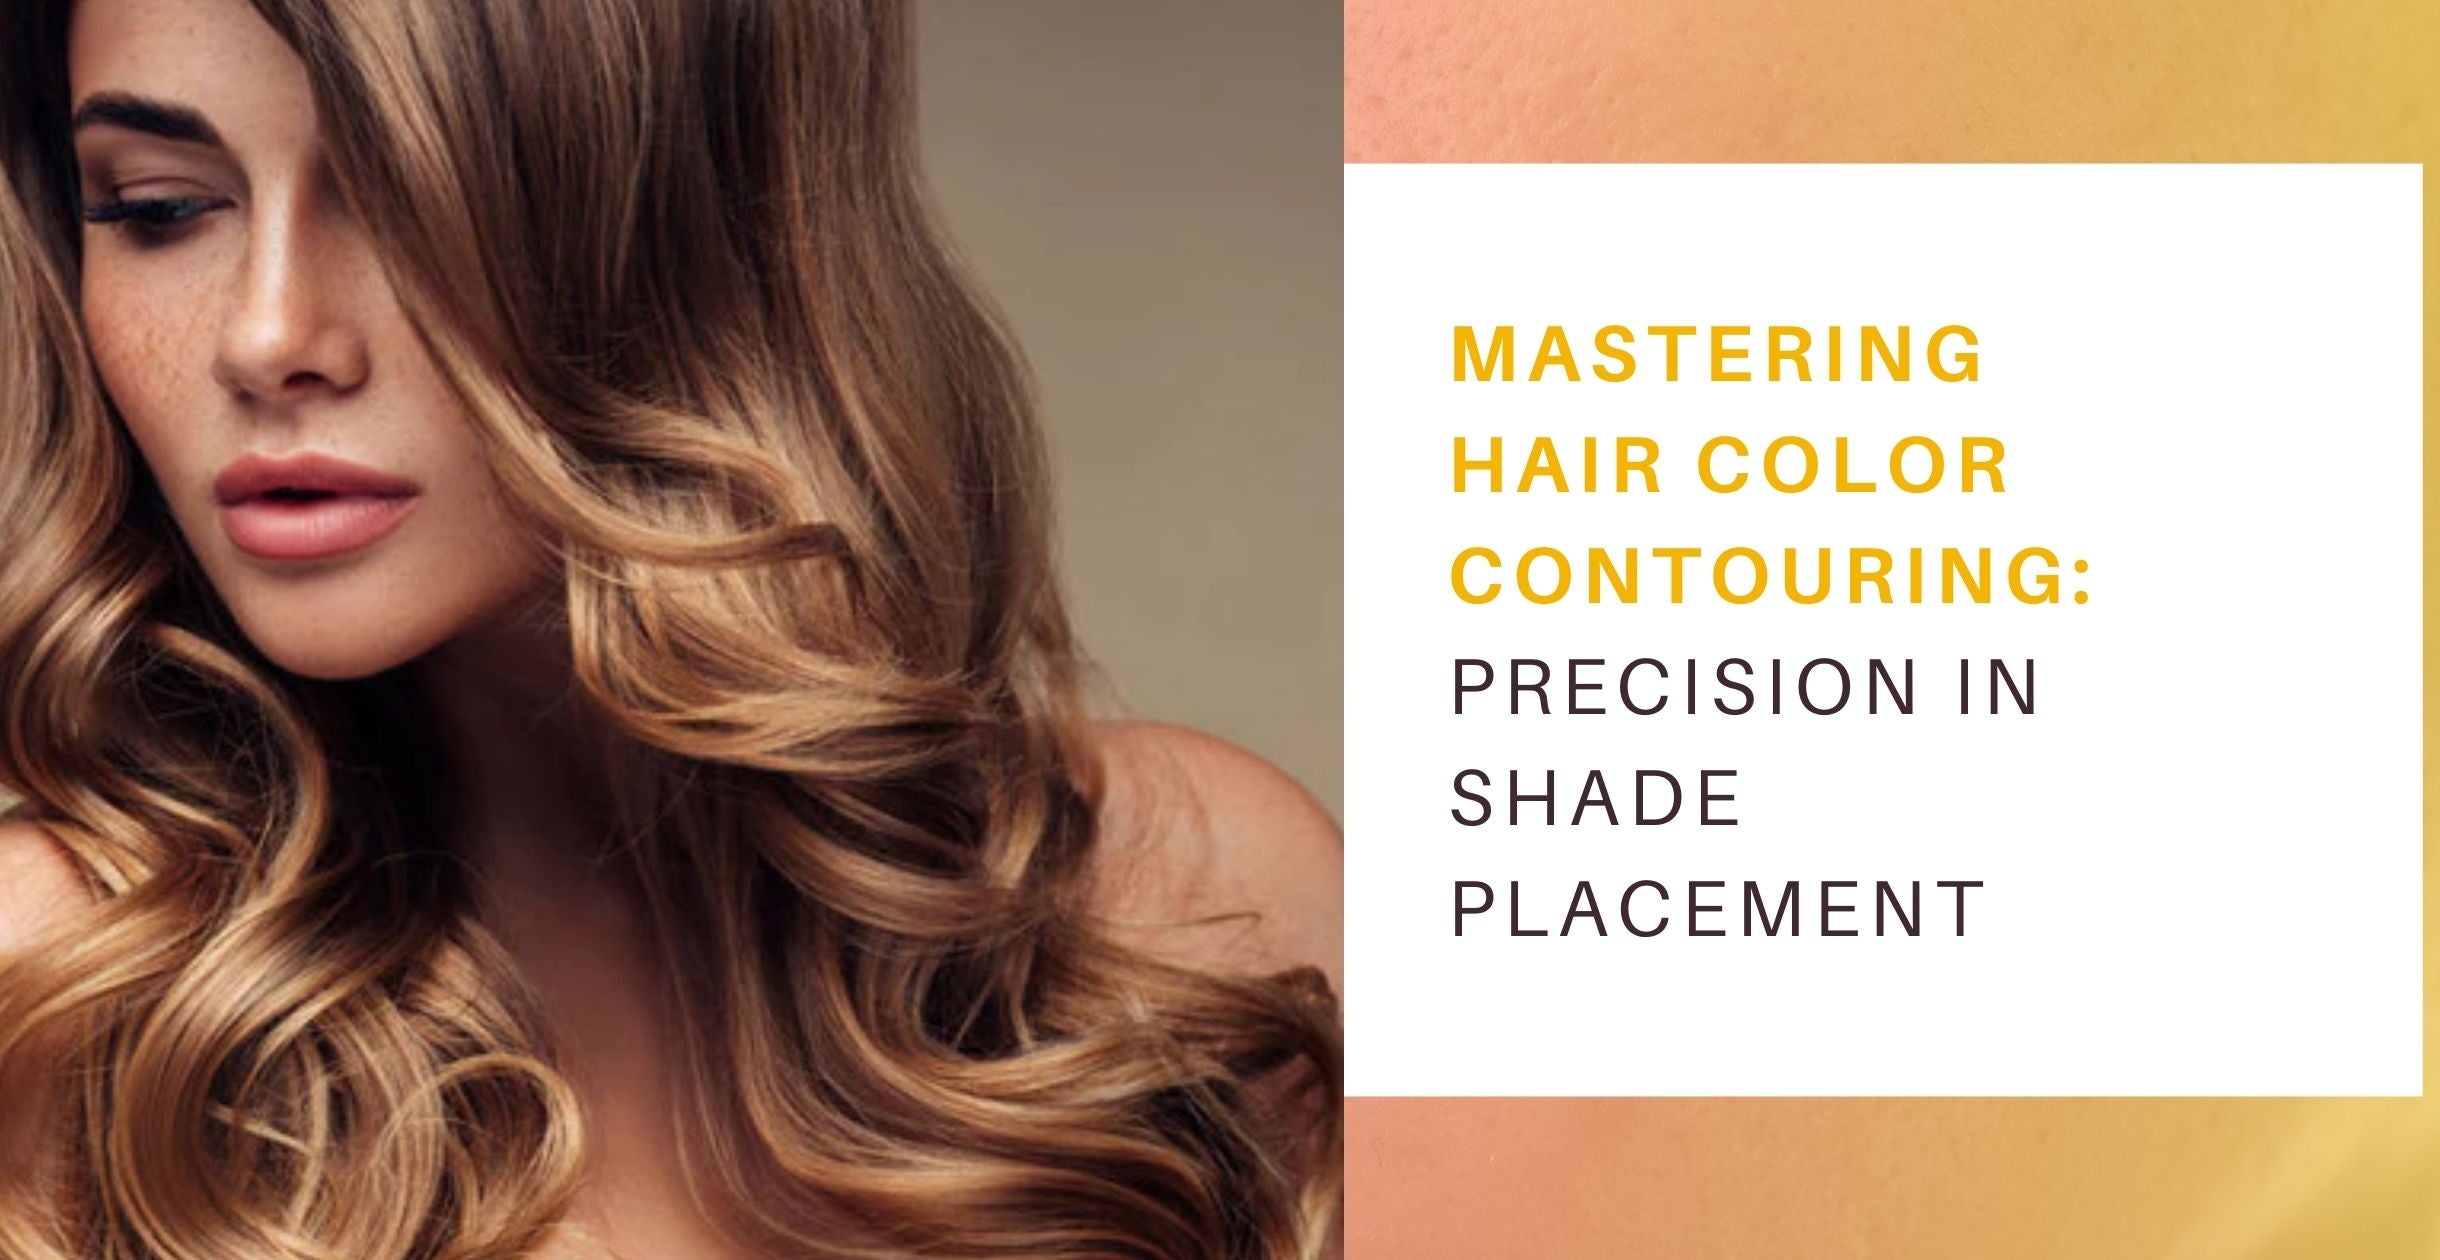 Mastering Hair Color Contouring: Precision in Shade Placement